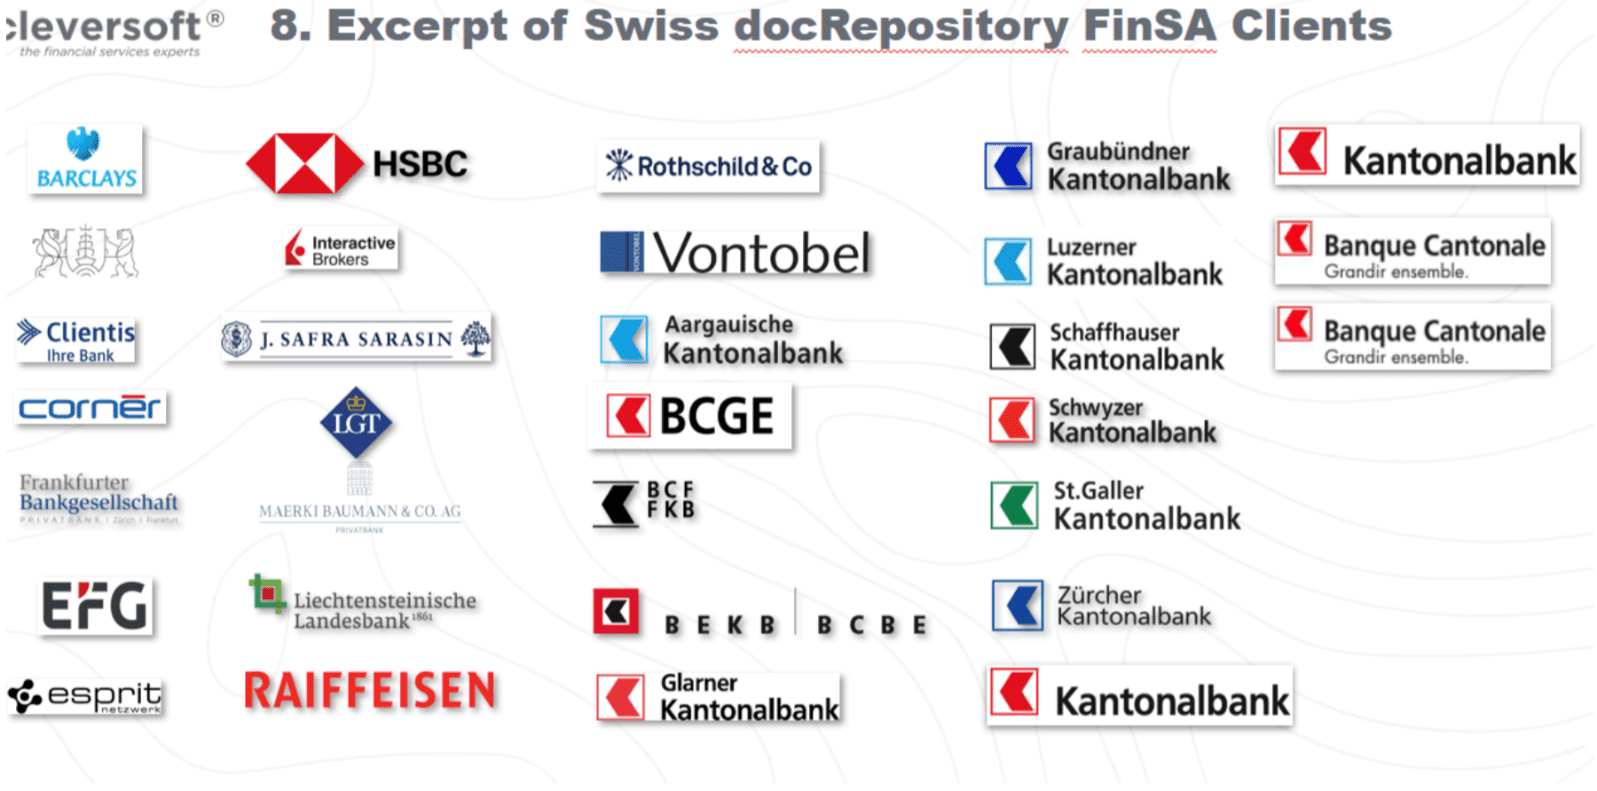 Swiss docRepository FinSA banking distribution clients